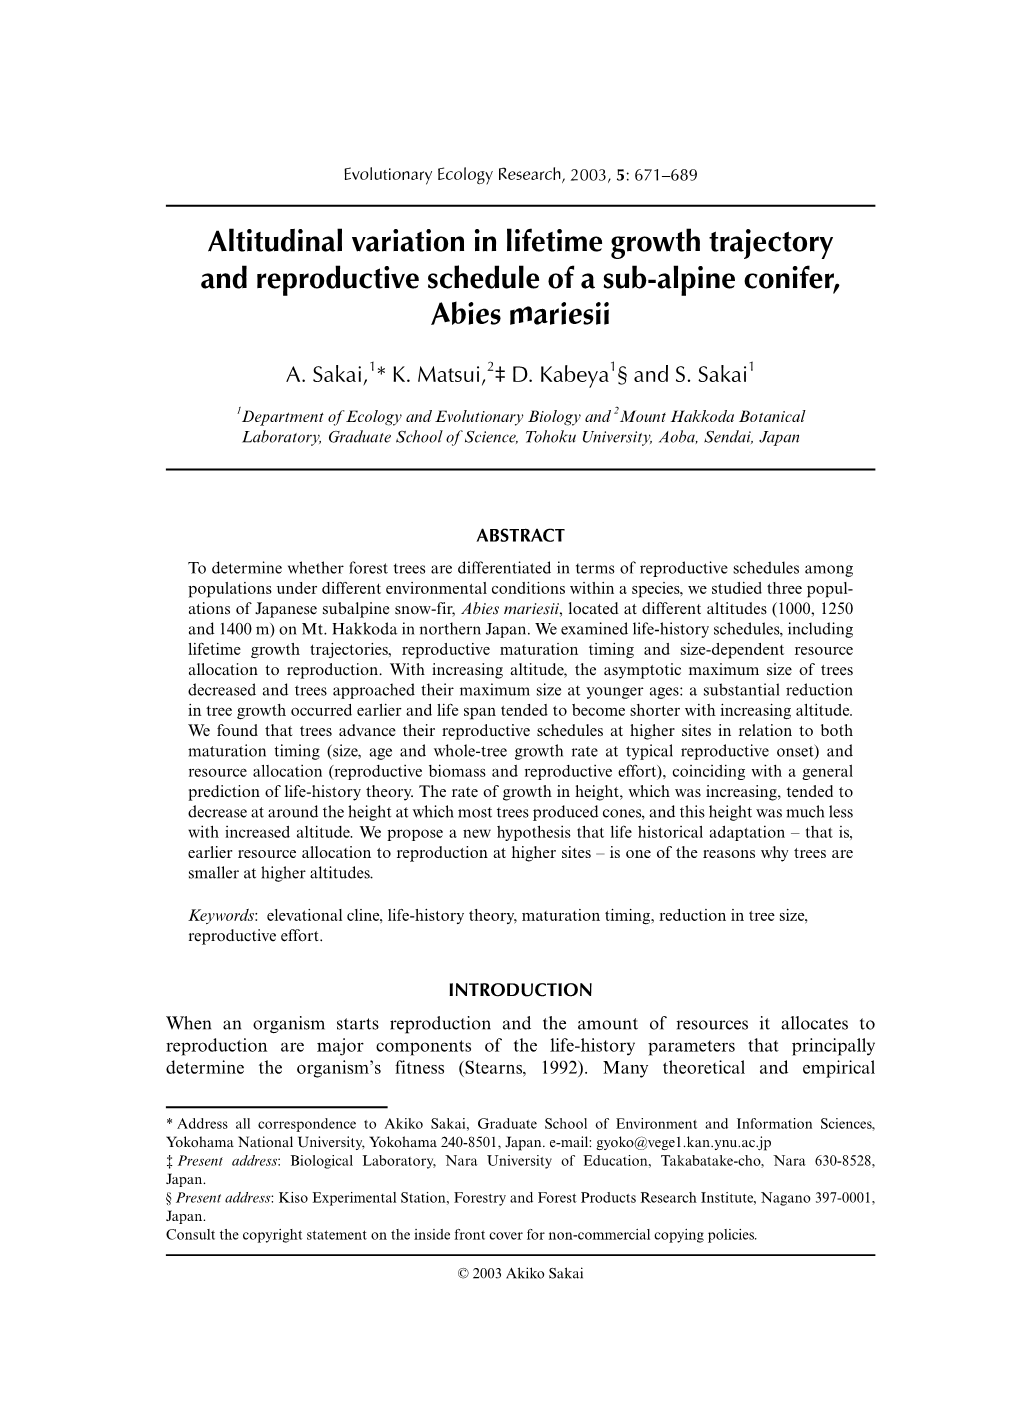 Altitudinal Variation in Lifetime Growth Trajectory and Reproductive Schedule of a Sub-Alpine Conifer, Abies Mariesii